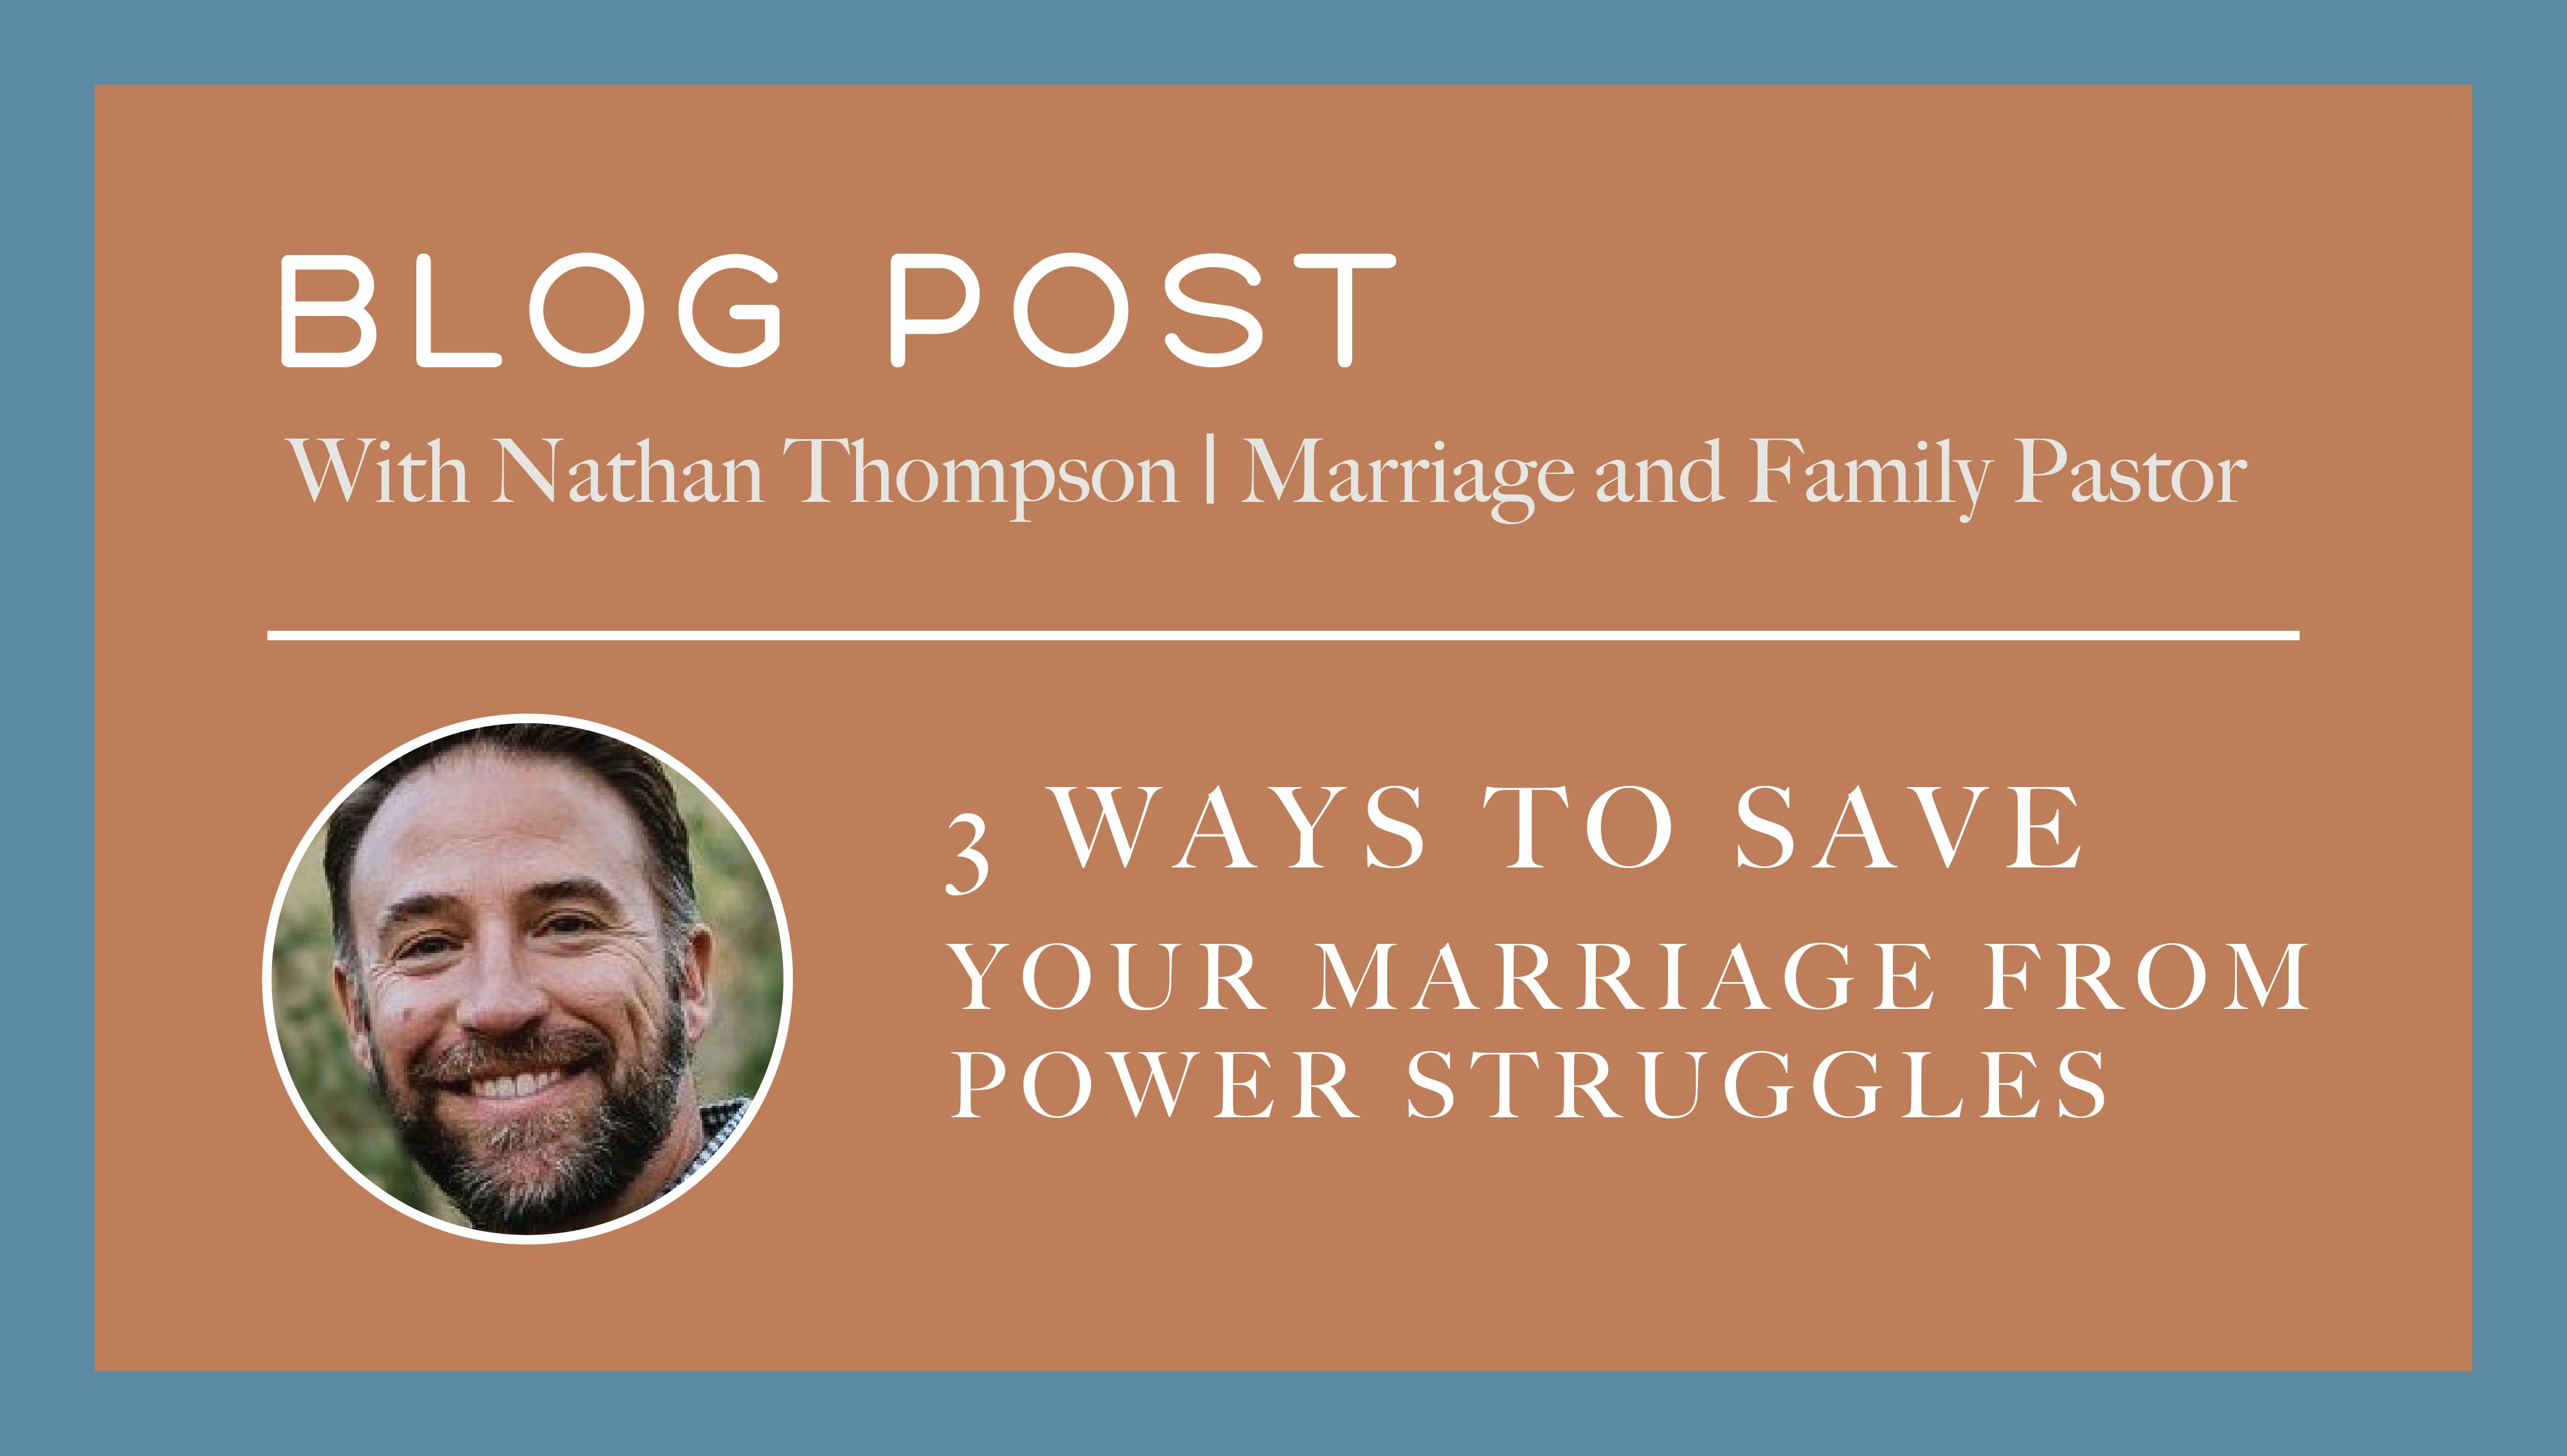 3 Ways to Save Your Marriage from Power Struggles